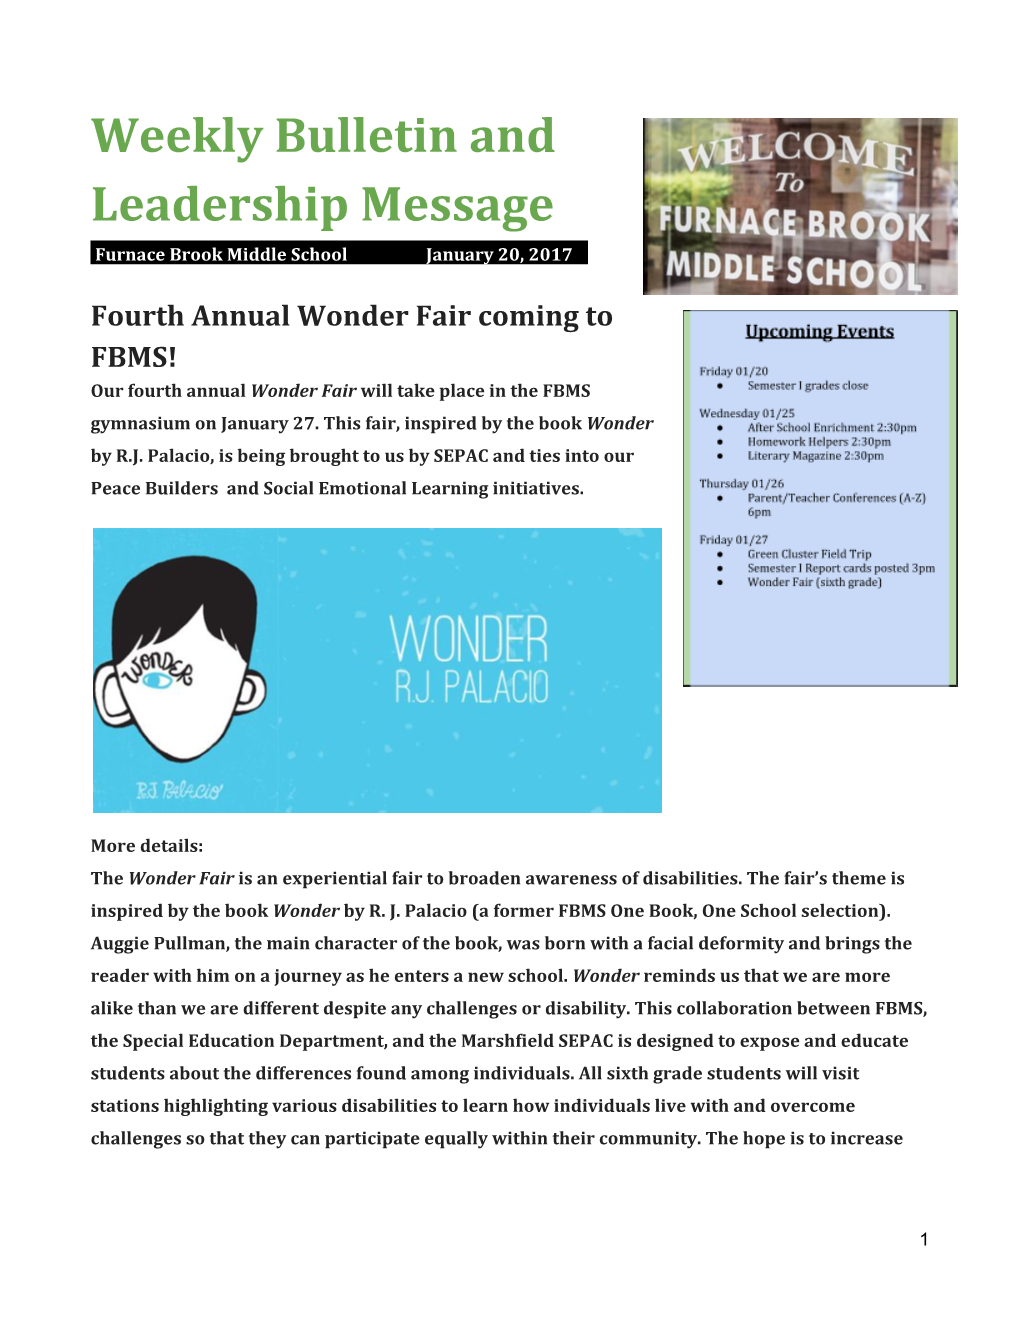 Weekly Bulletin and Leadership Message